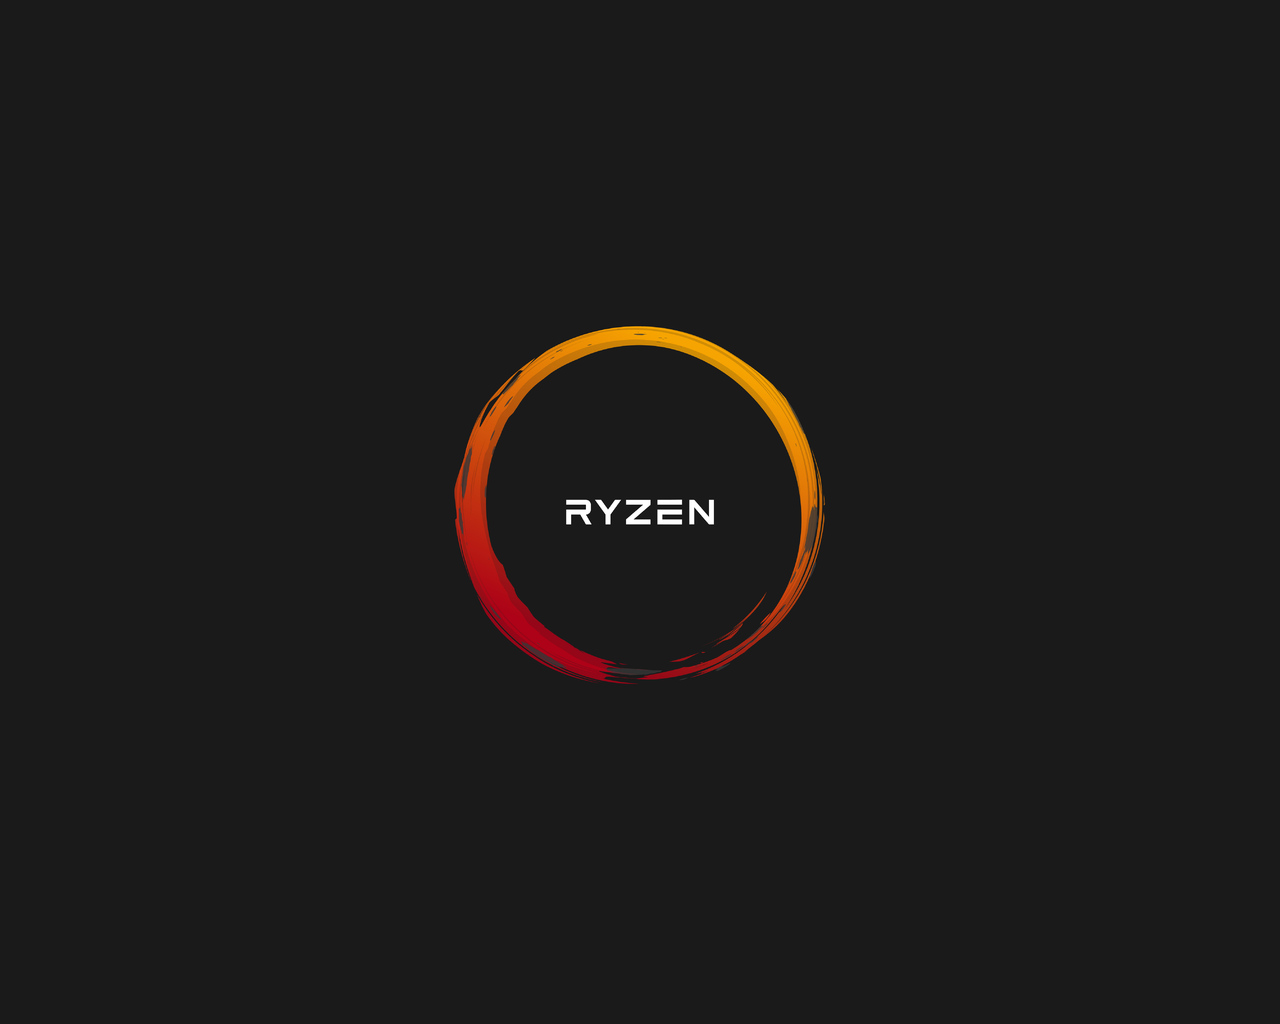 1280x1024 Amd Ryzen 8k 1280x1024 Resolution Hd 4k Wallpapers Images Backgrounds Photos And Pictures